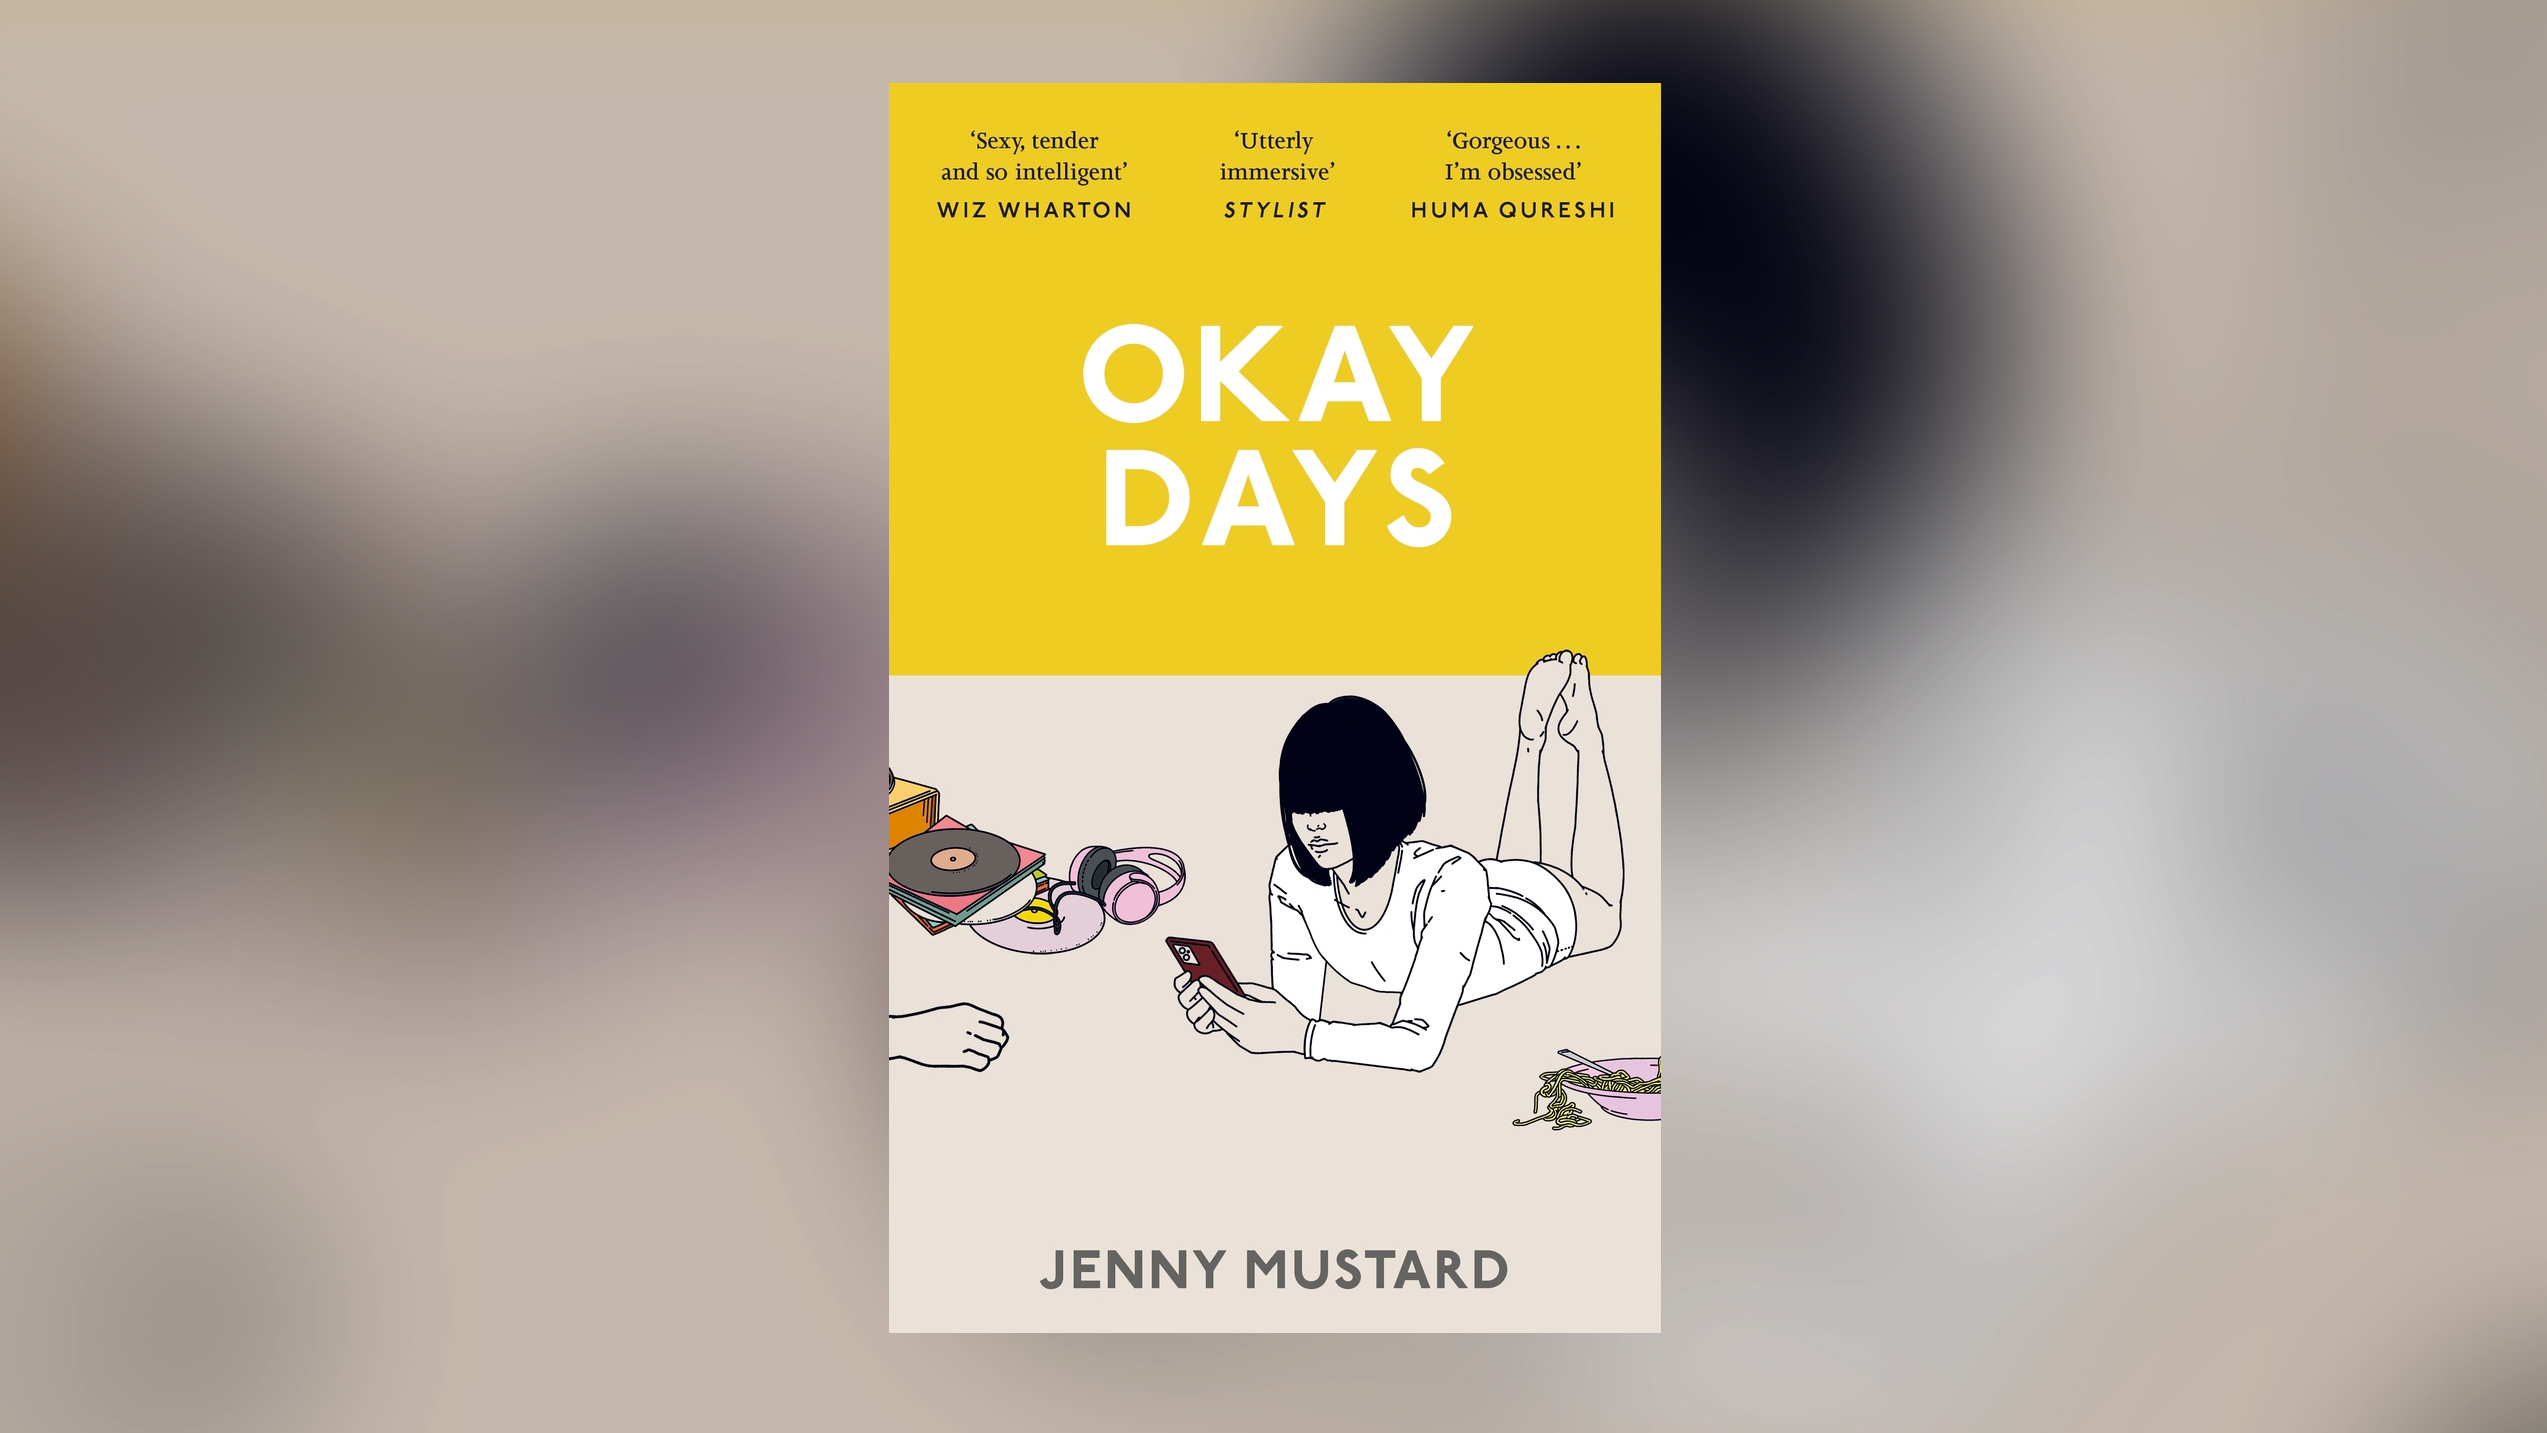 Okay days book cover